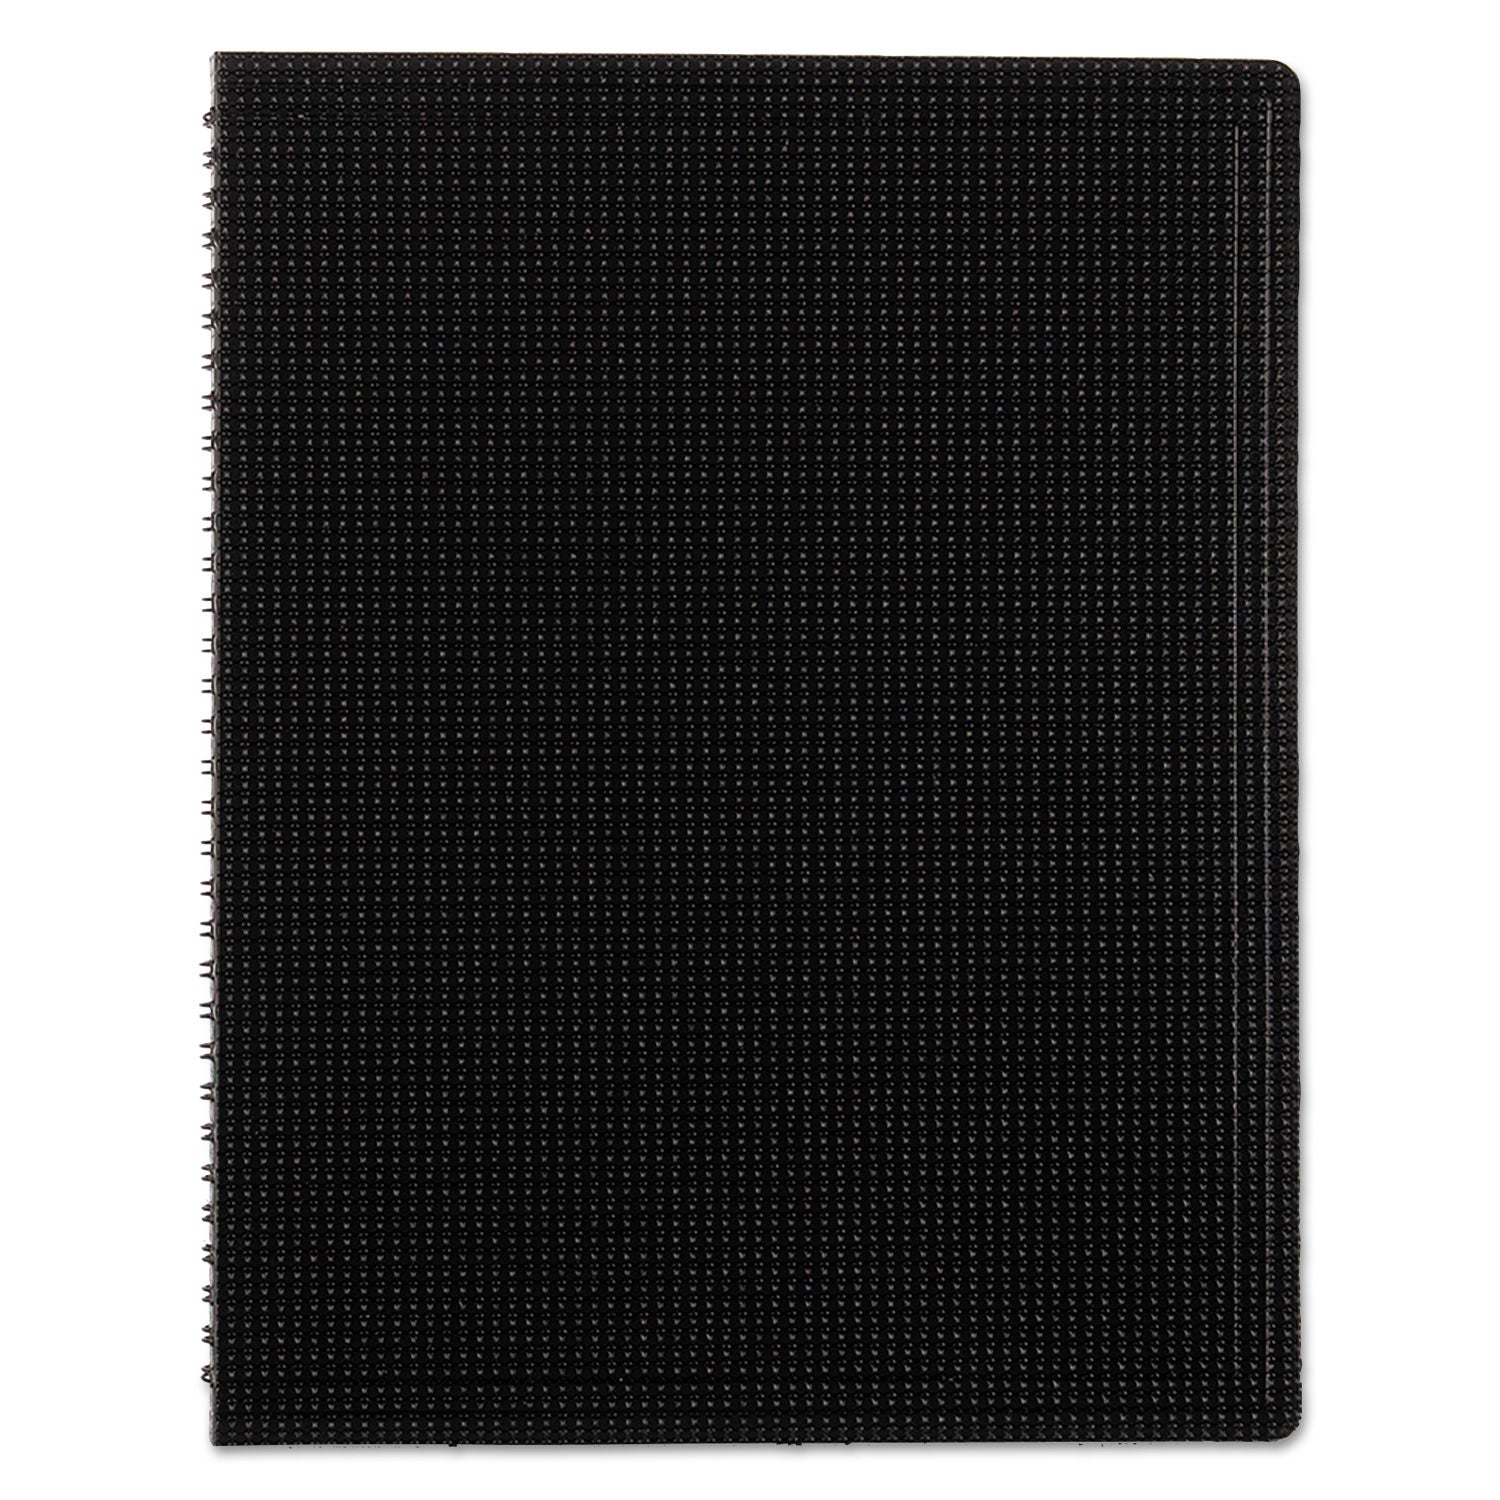 Duraflex Poly Notebook, 1-Subject, Medium/College Rule, Black Cover, (80) 11 x 8.5 Sheets - 